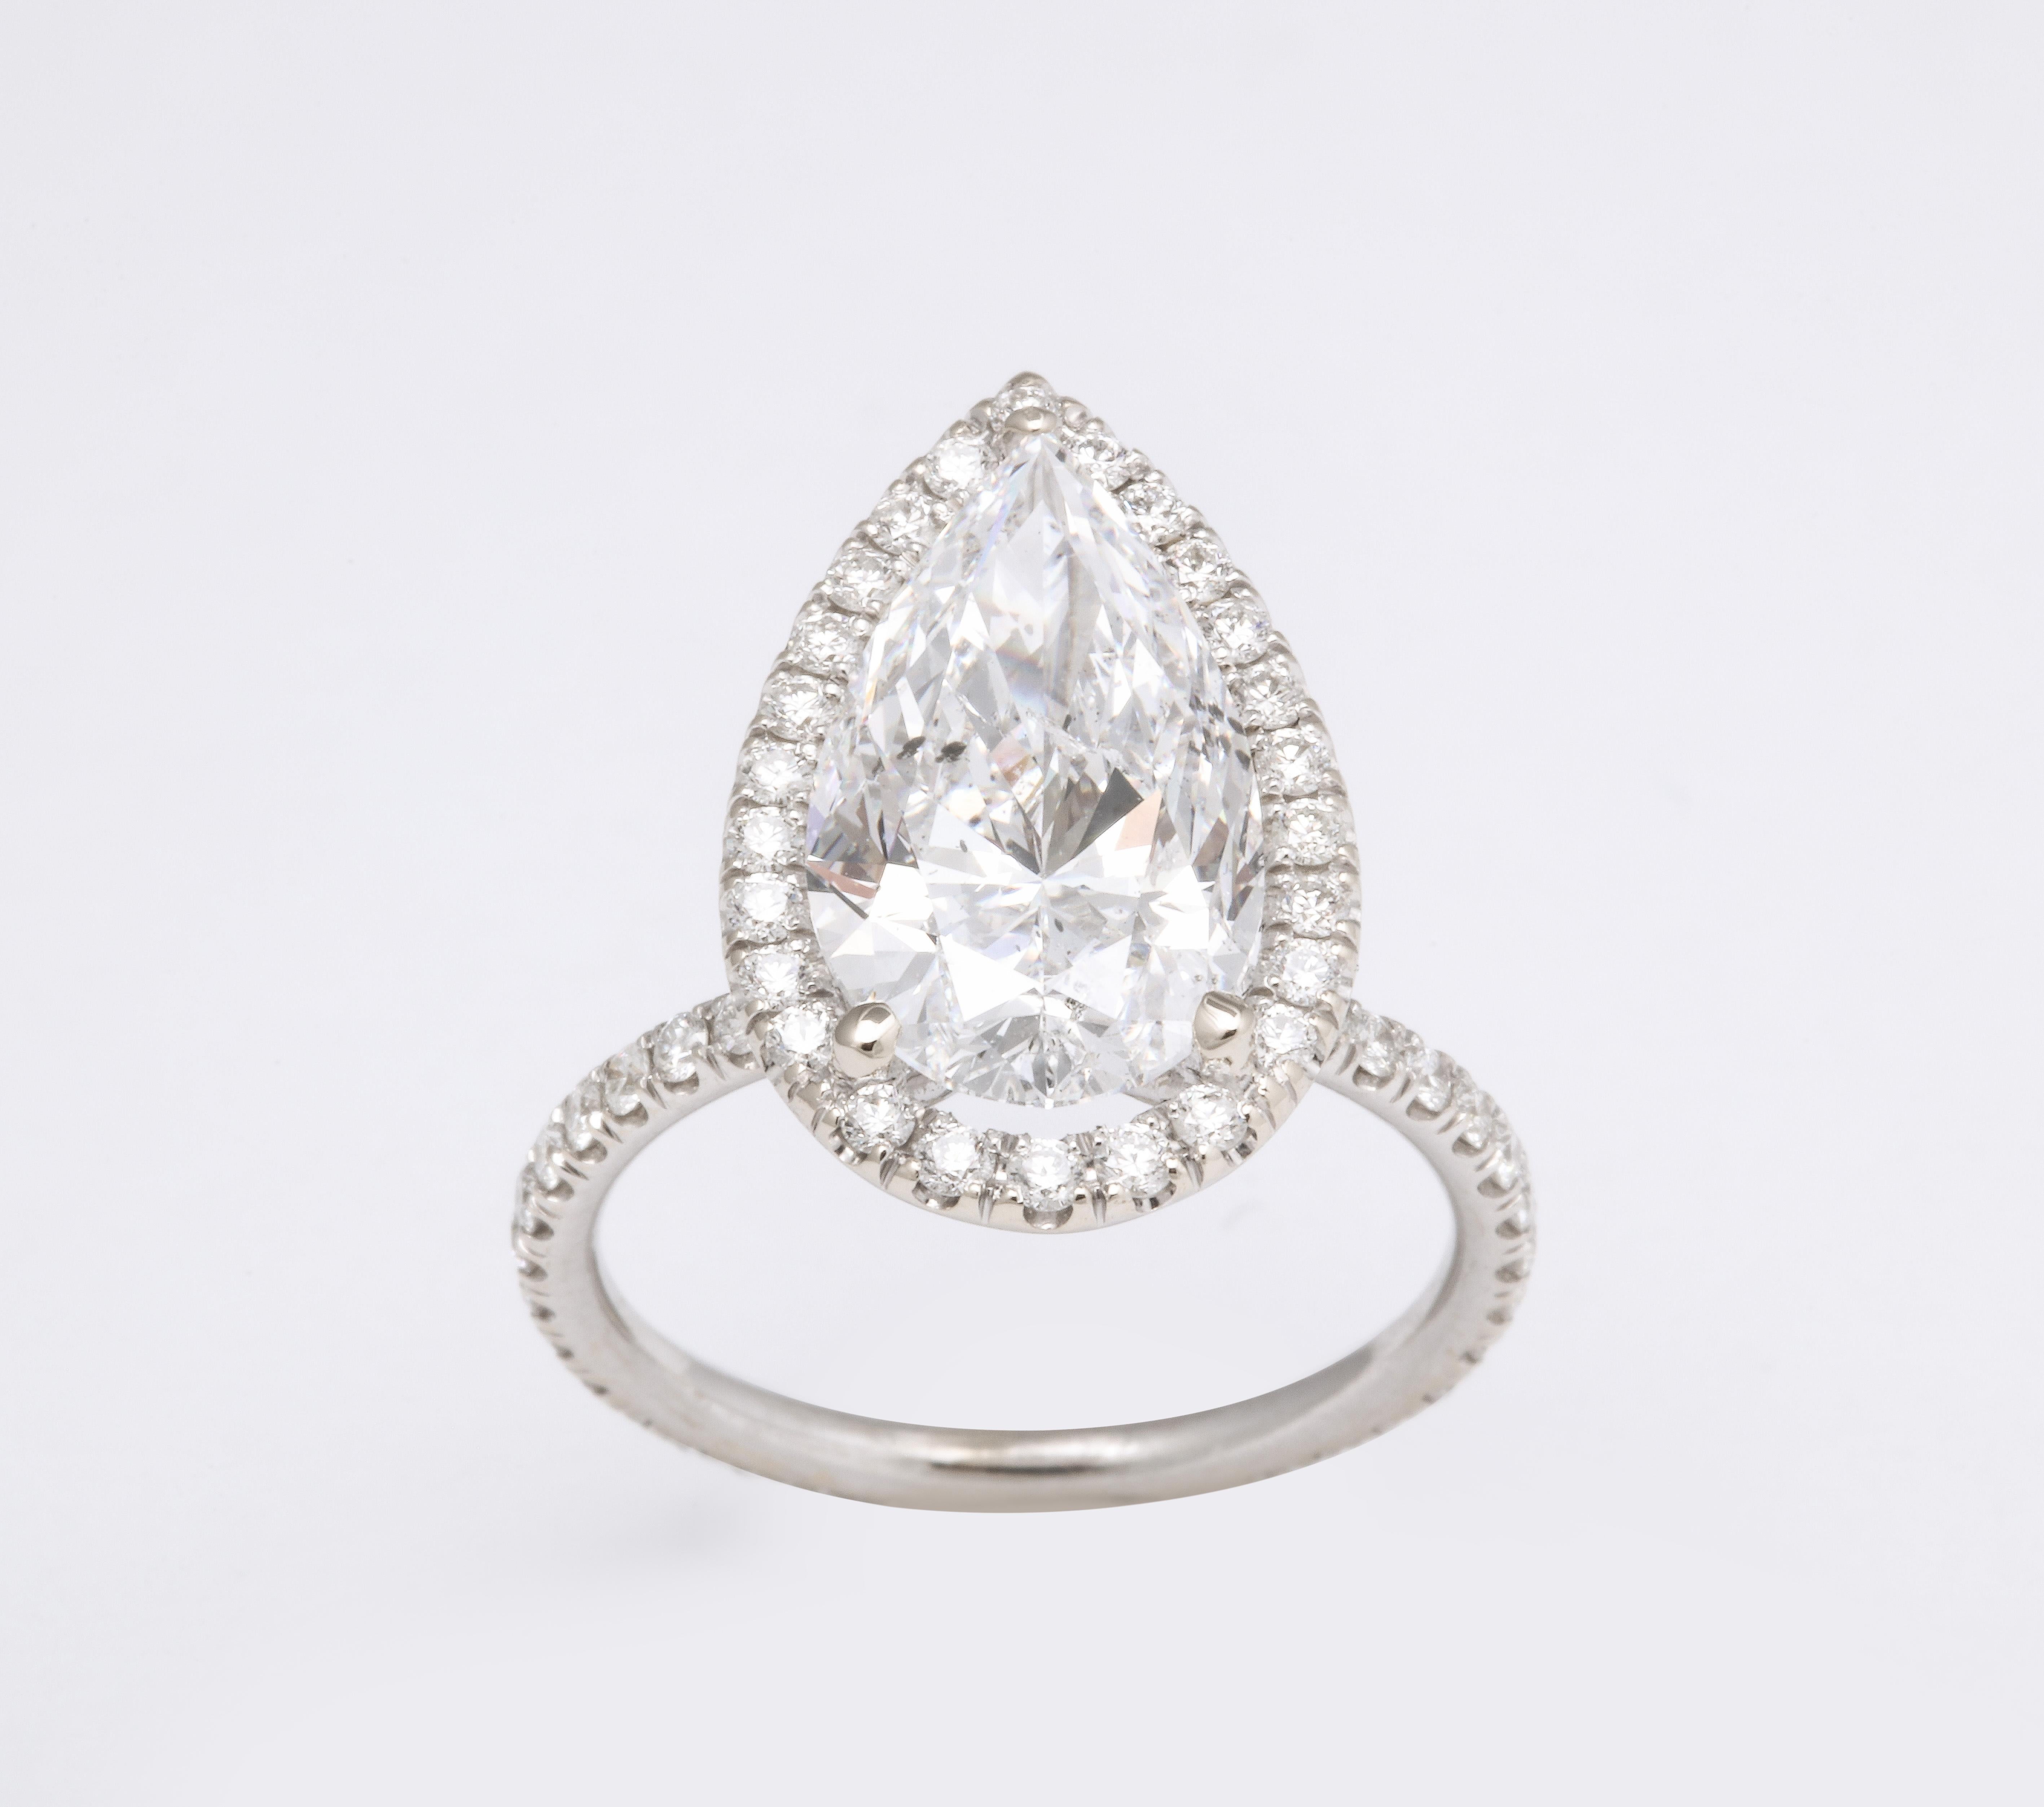 5 Carat D Color Pear Shape Engagement Ring GIA Certified 2